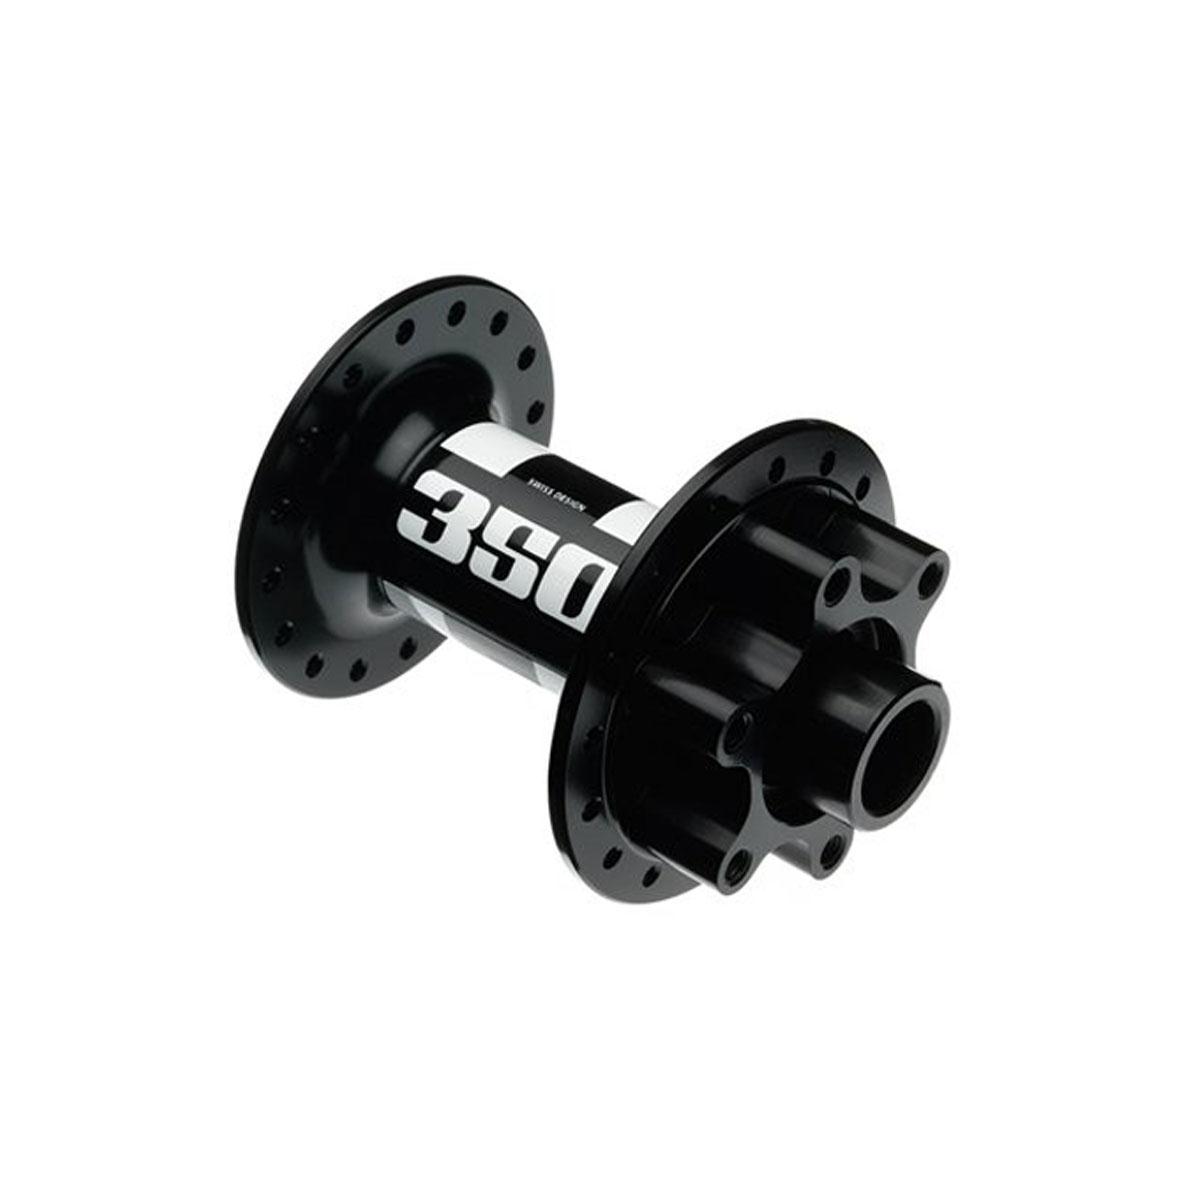 Forward hub 350 disc brake is without quick release 100mm/15mm